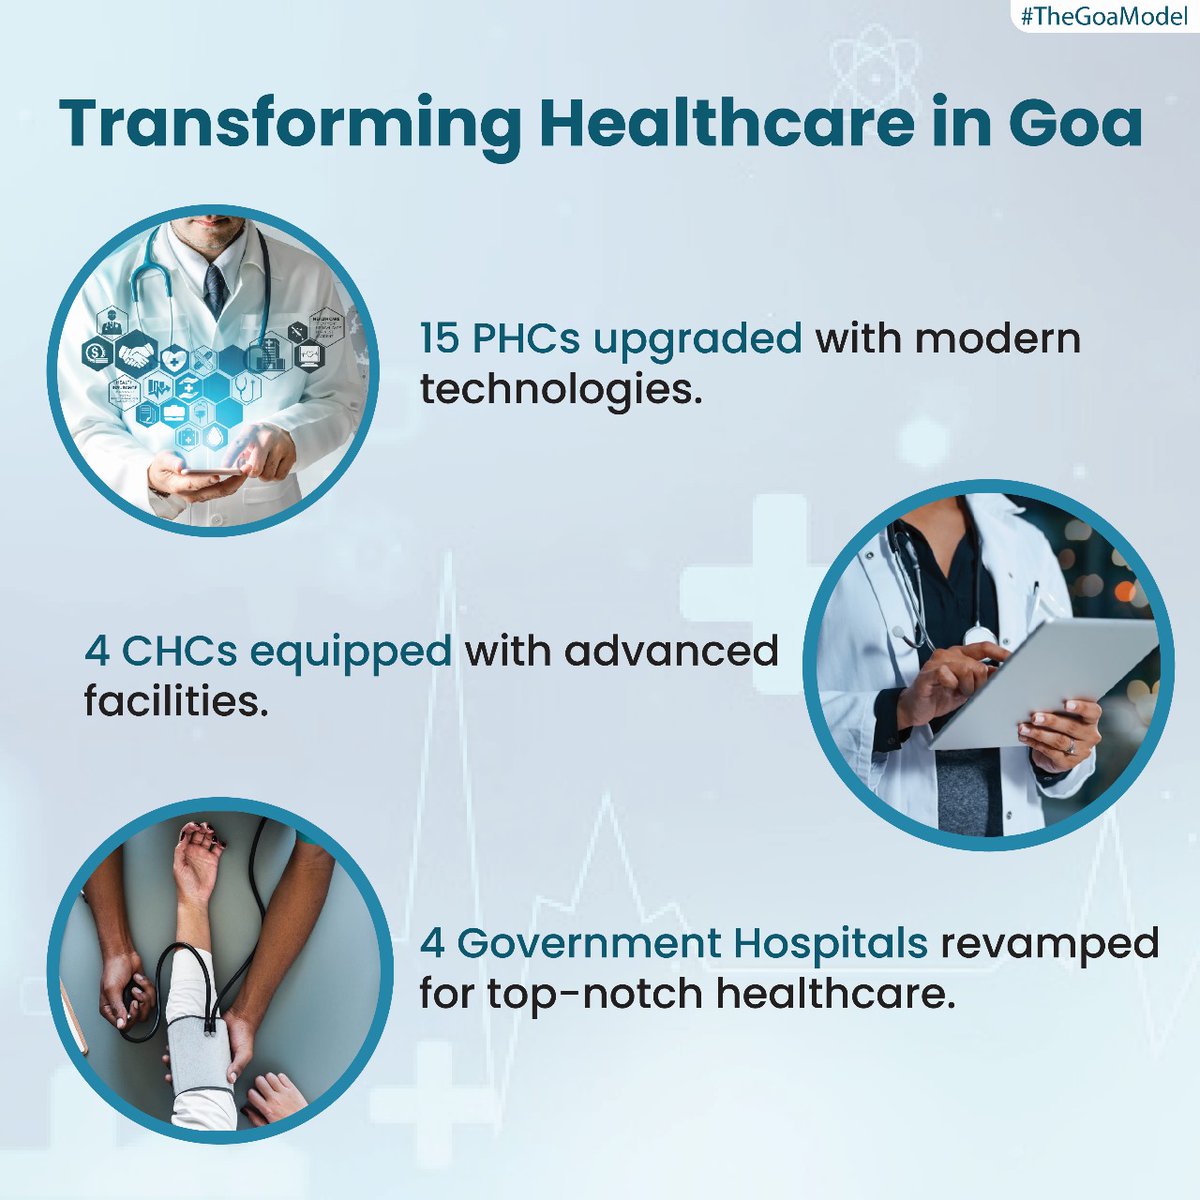 Goa's healthcare is undergoing a revolution! Upgraded PHCs, CHCs, and Government Hospitals now offer state-of-the-art services, ensuring a healthier future for all. #TheGoaModel #GoaHealthcare
#GoaHealthcare #HealthcareRevolution #HealthcareAccess #HealthcareImprovement